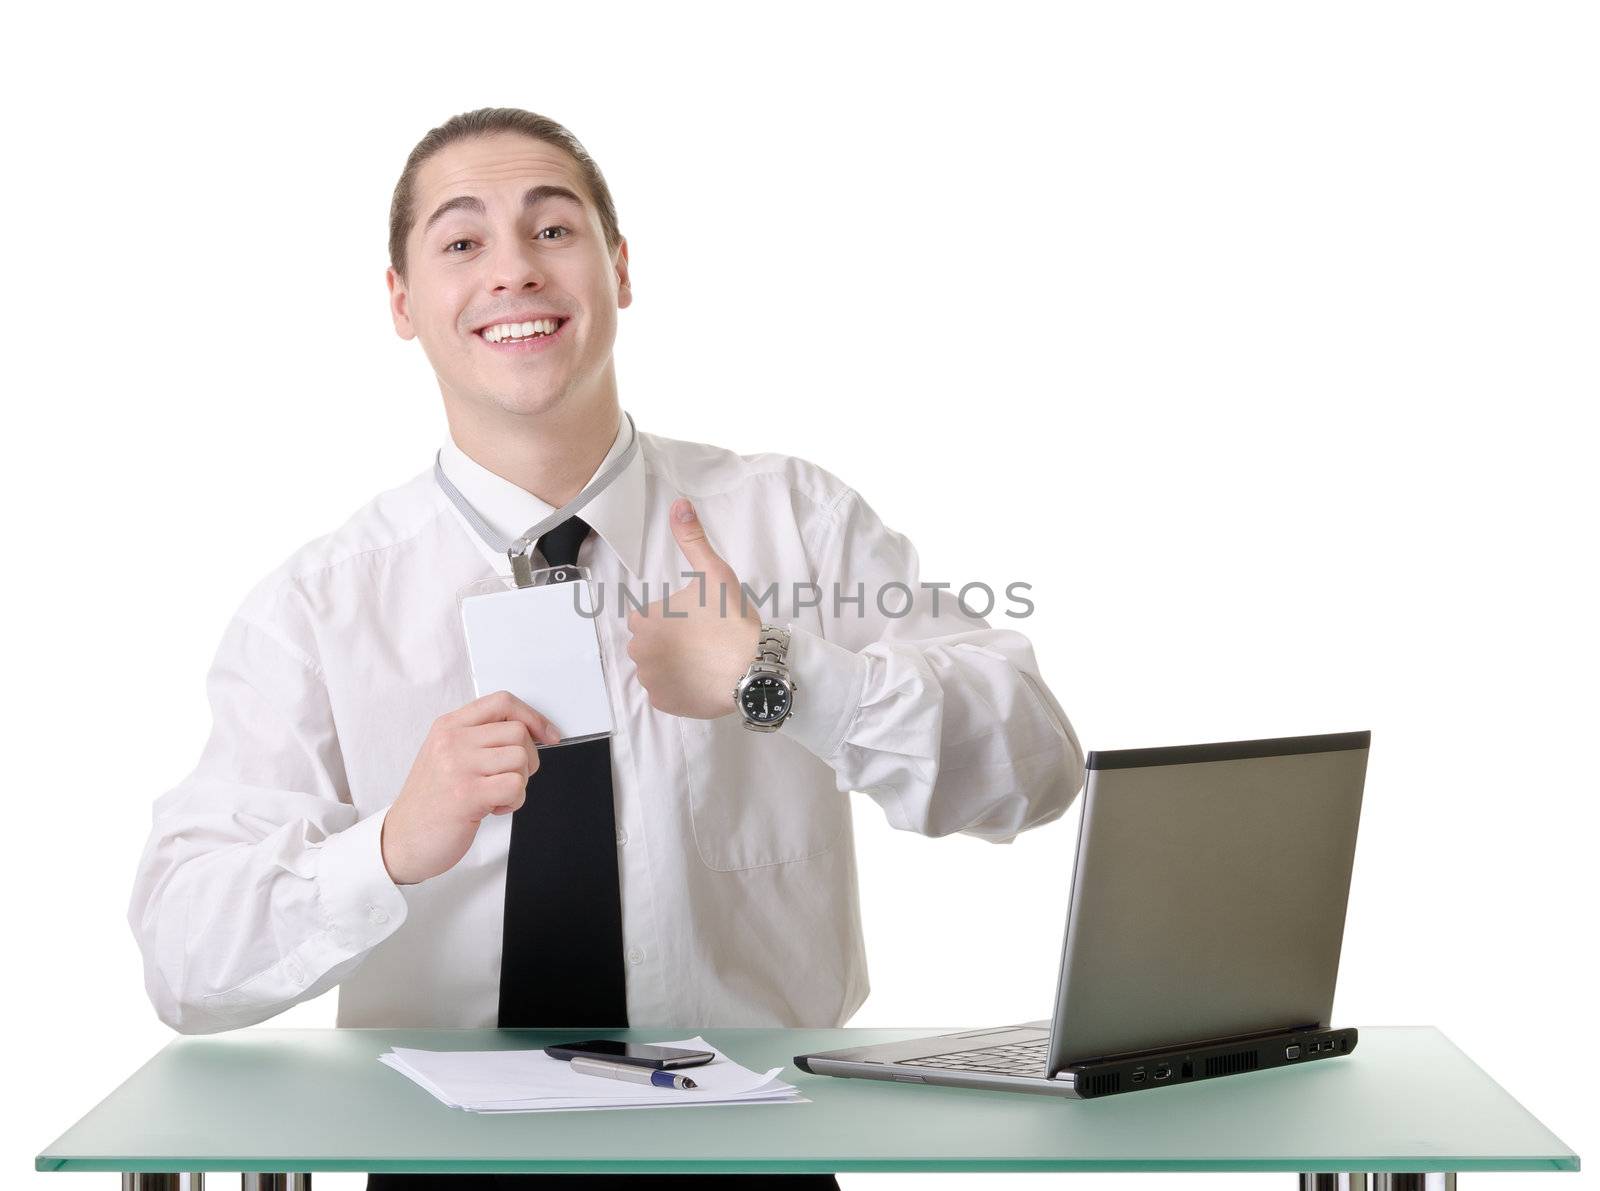 Businessman gesturing with emotions on a white background